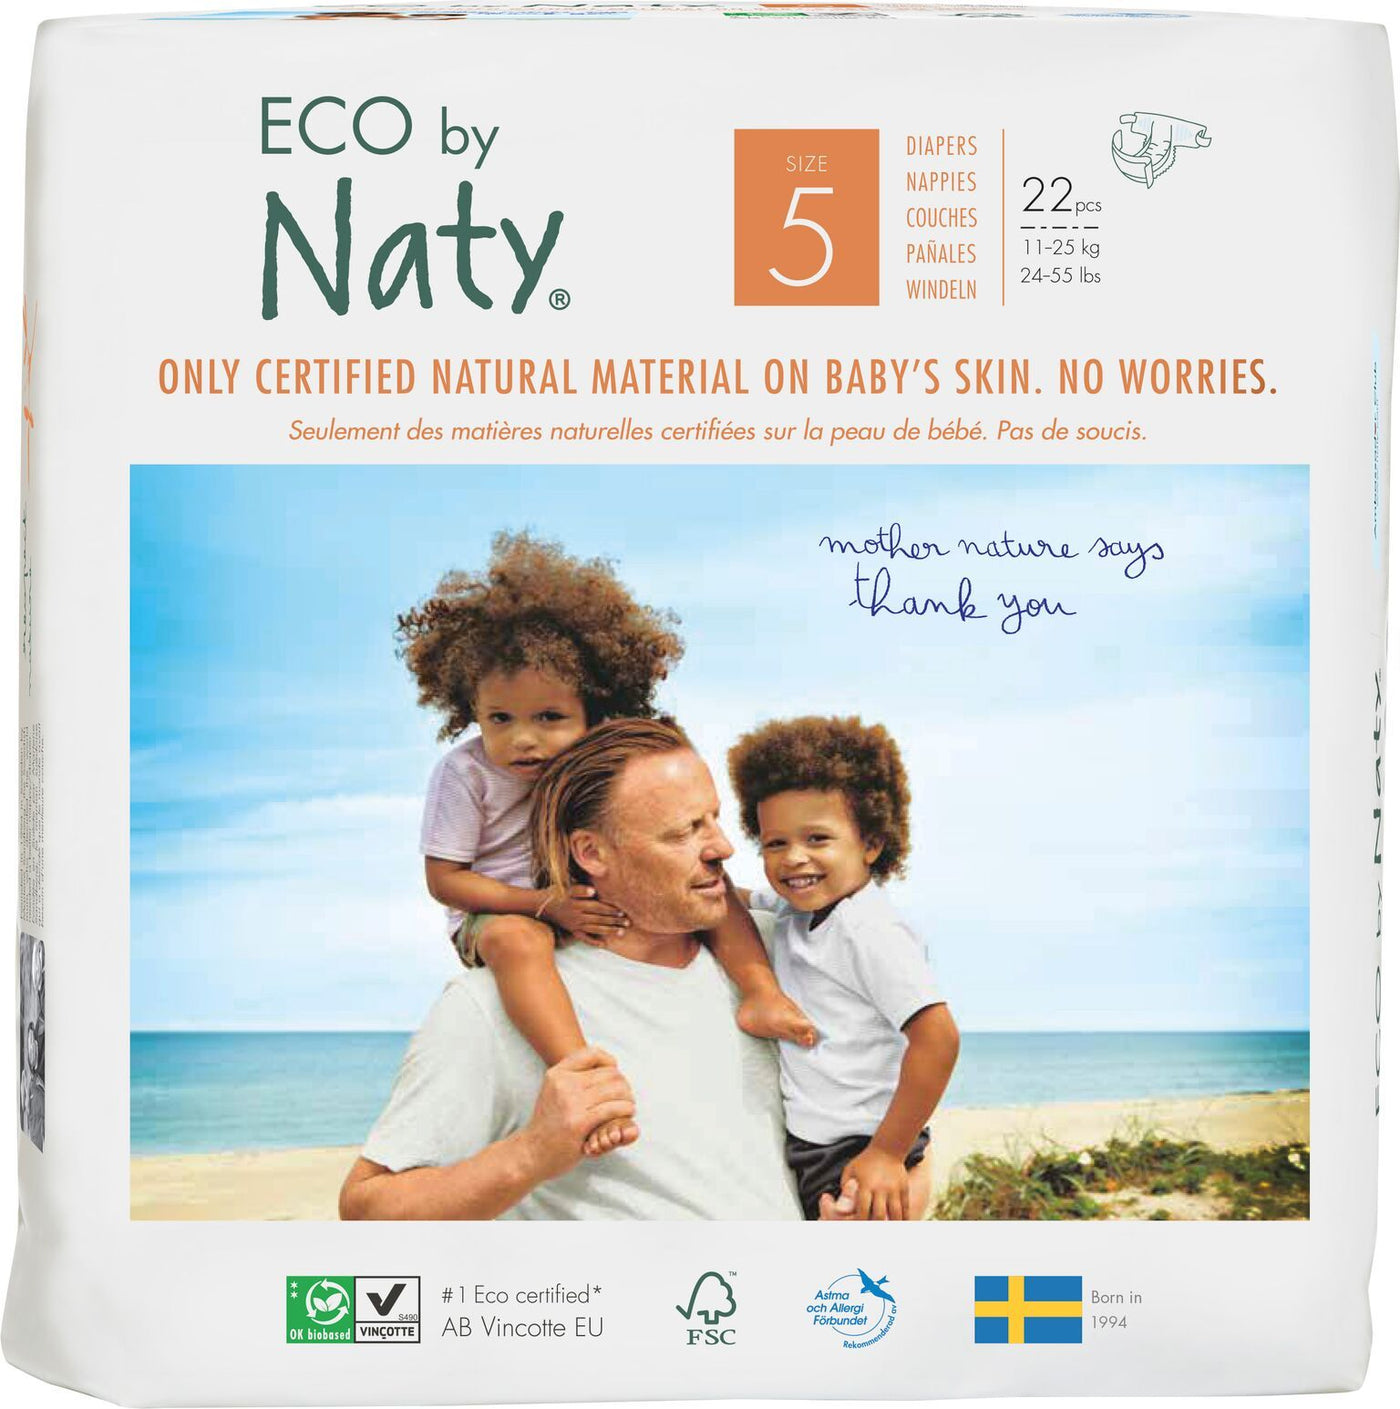 NatySize 5 Nappies - 22 packMulti Pack: 1disposable nappies size 5Earthlets